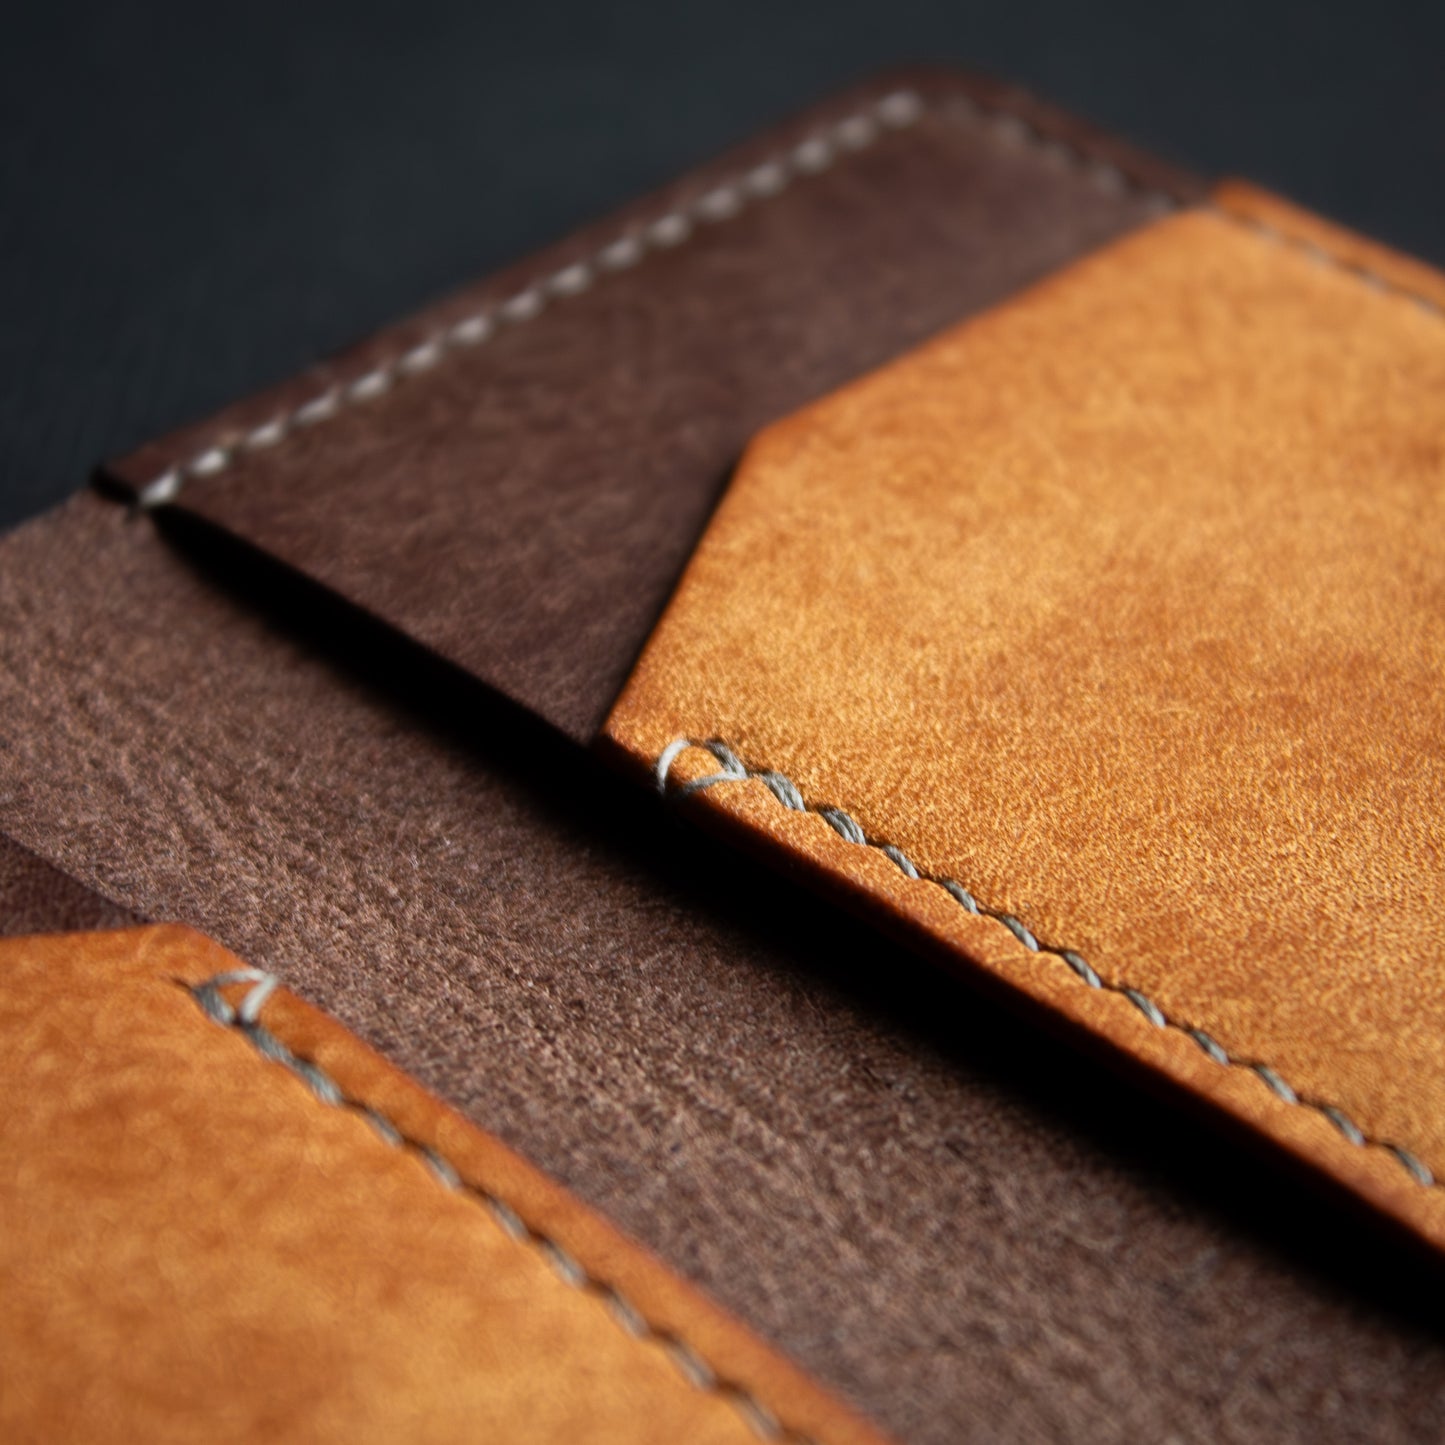 PDF TEMPLATE - handcrafted brown leather wallet ontop of black background - open leather cardholder - Badalassi Carlo Pueblo Cognac and Castagno leather - close up saddle stich with grey xiange thread 